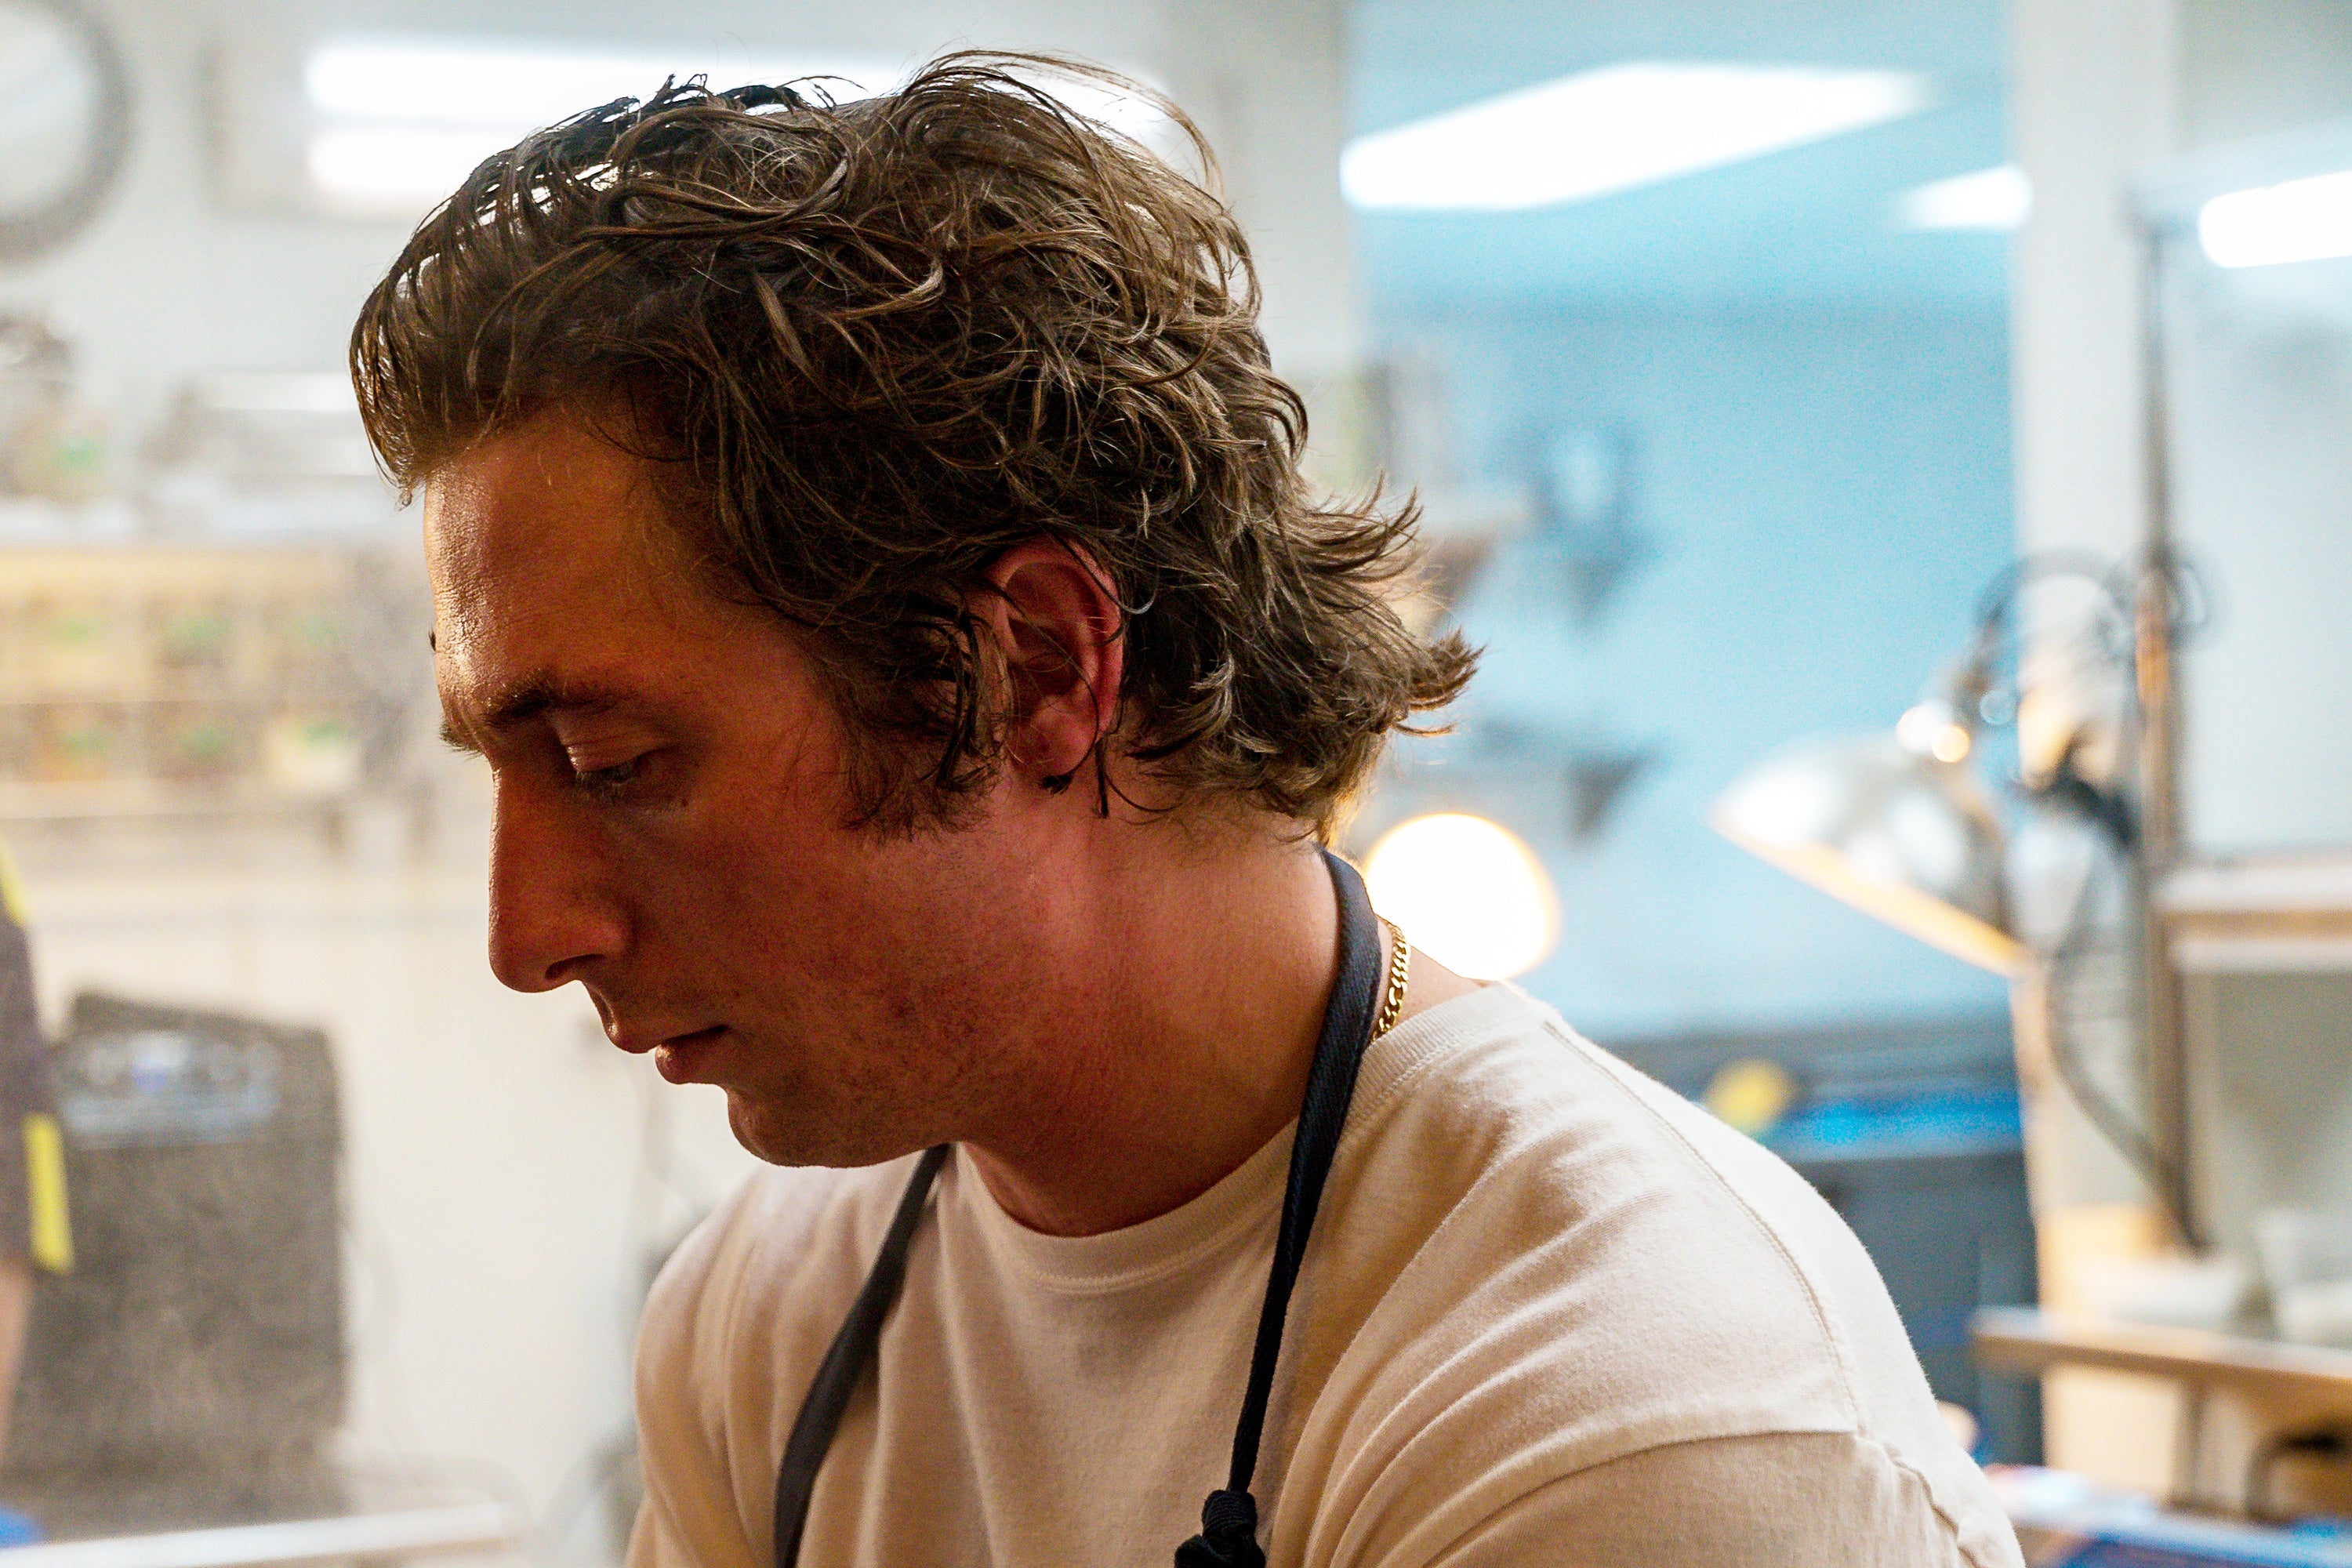 A very dreamy man with long, mussy hair in a restaurant kitchen.